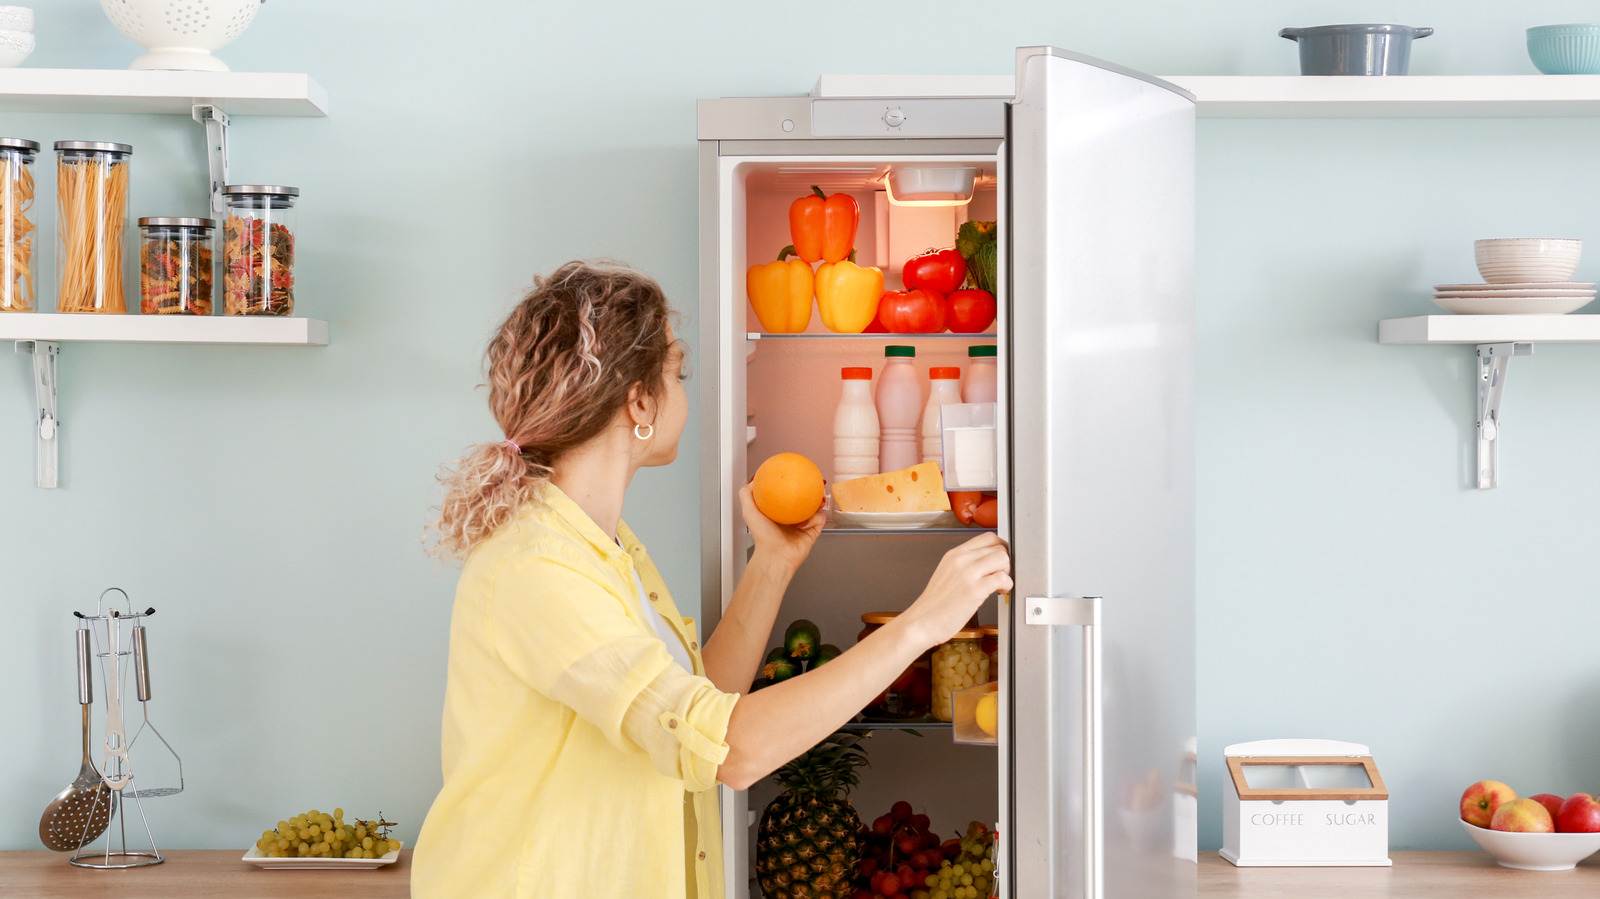 Why Doesn't Your Refrigerator Light Work? - Universal Appliance Repair